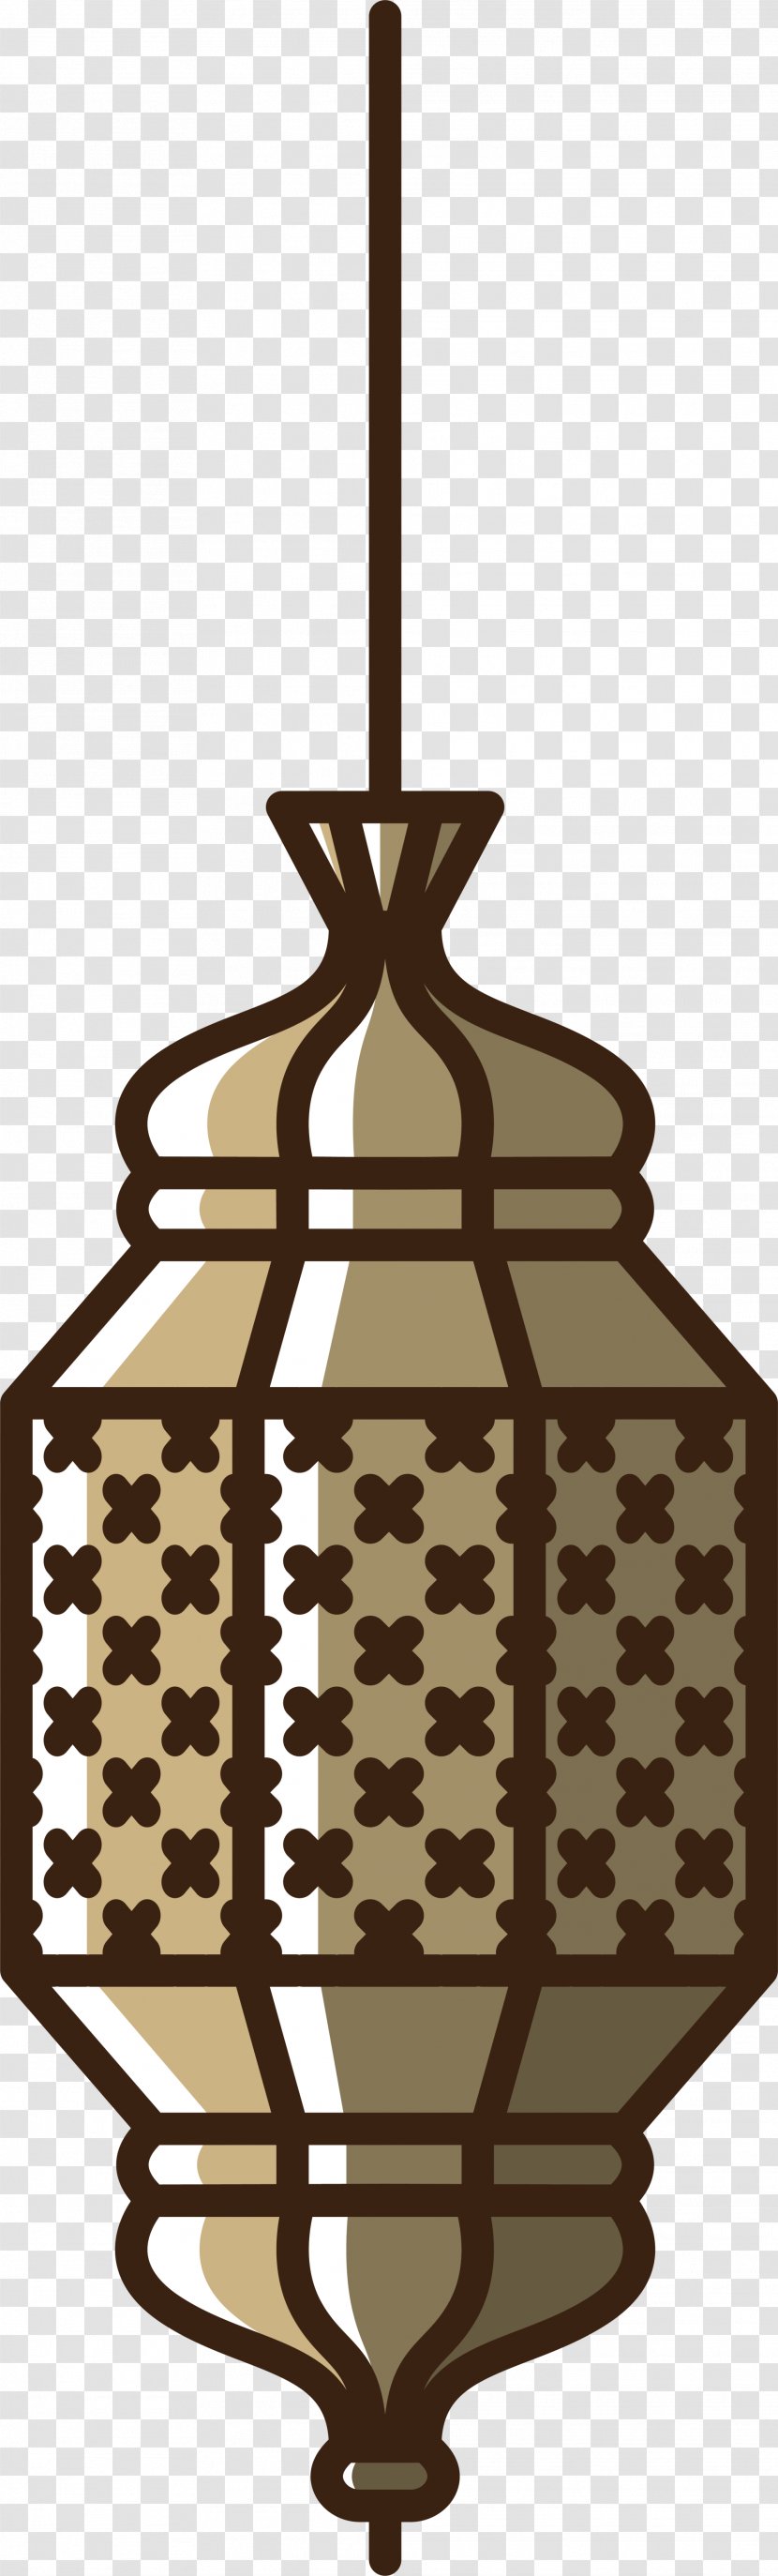 Mie Aceh Soto Betawi Cuisine - Light Fixture - Coffee Retro Lamps Transparent PNG